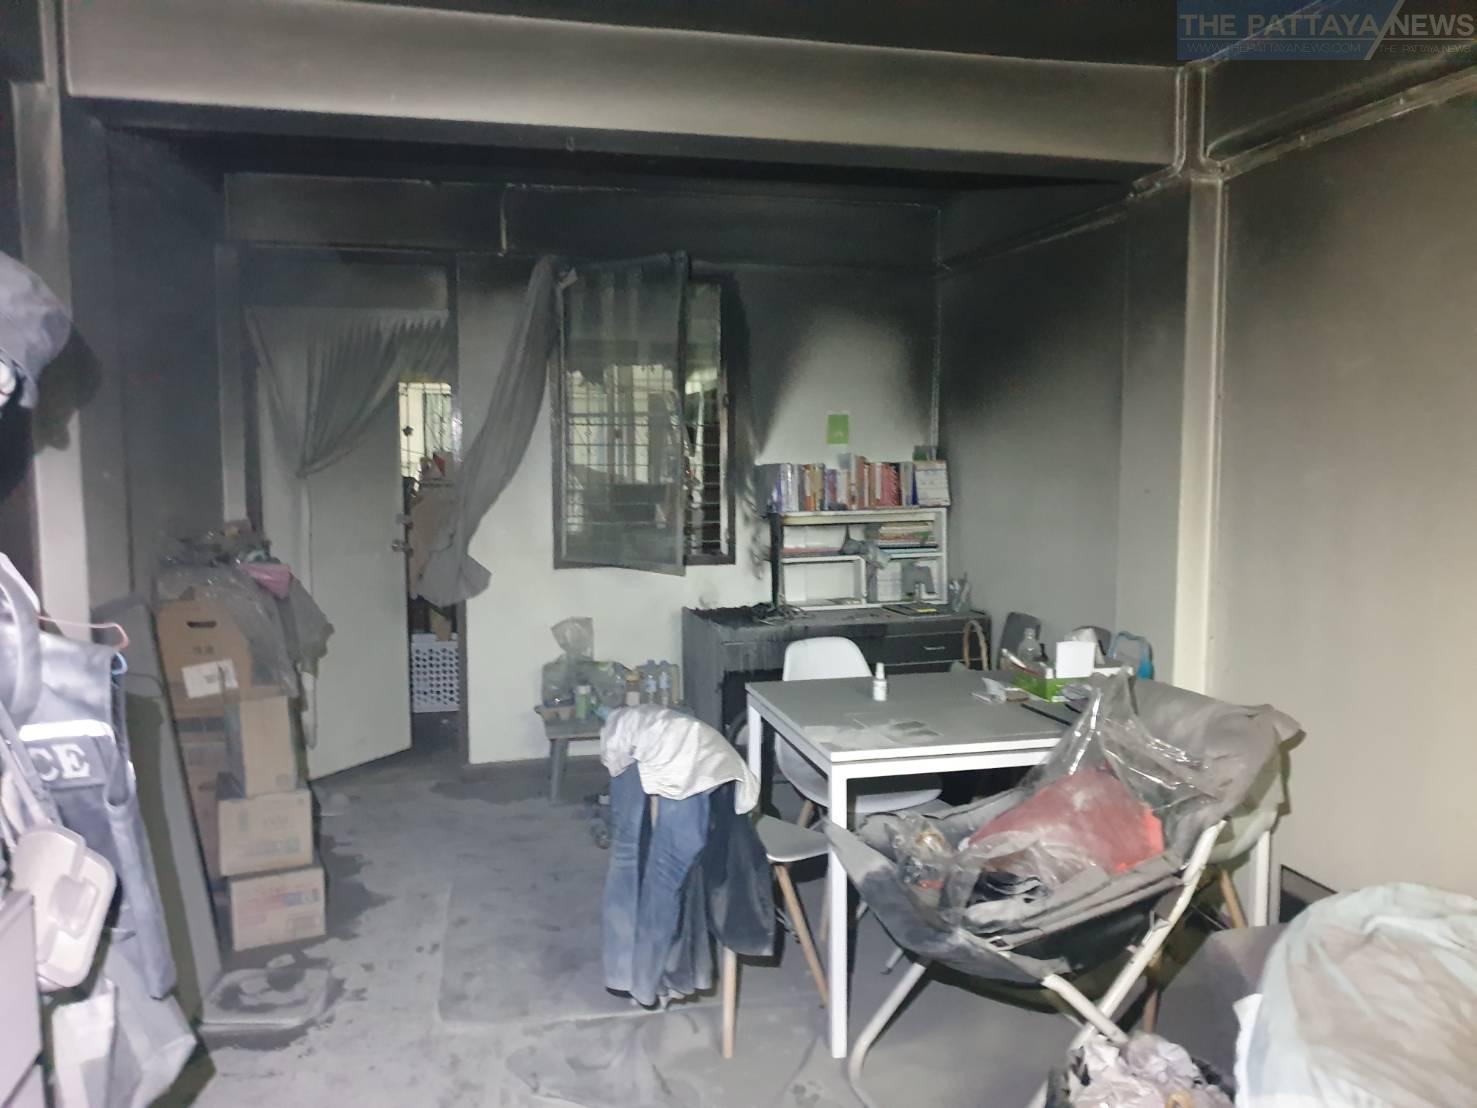 Video: Fire breaks out this morning at the Pattaya police dormitory